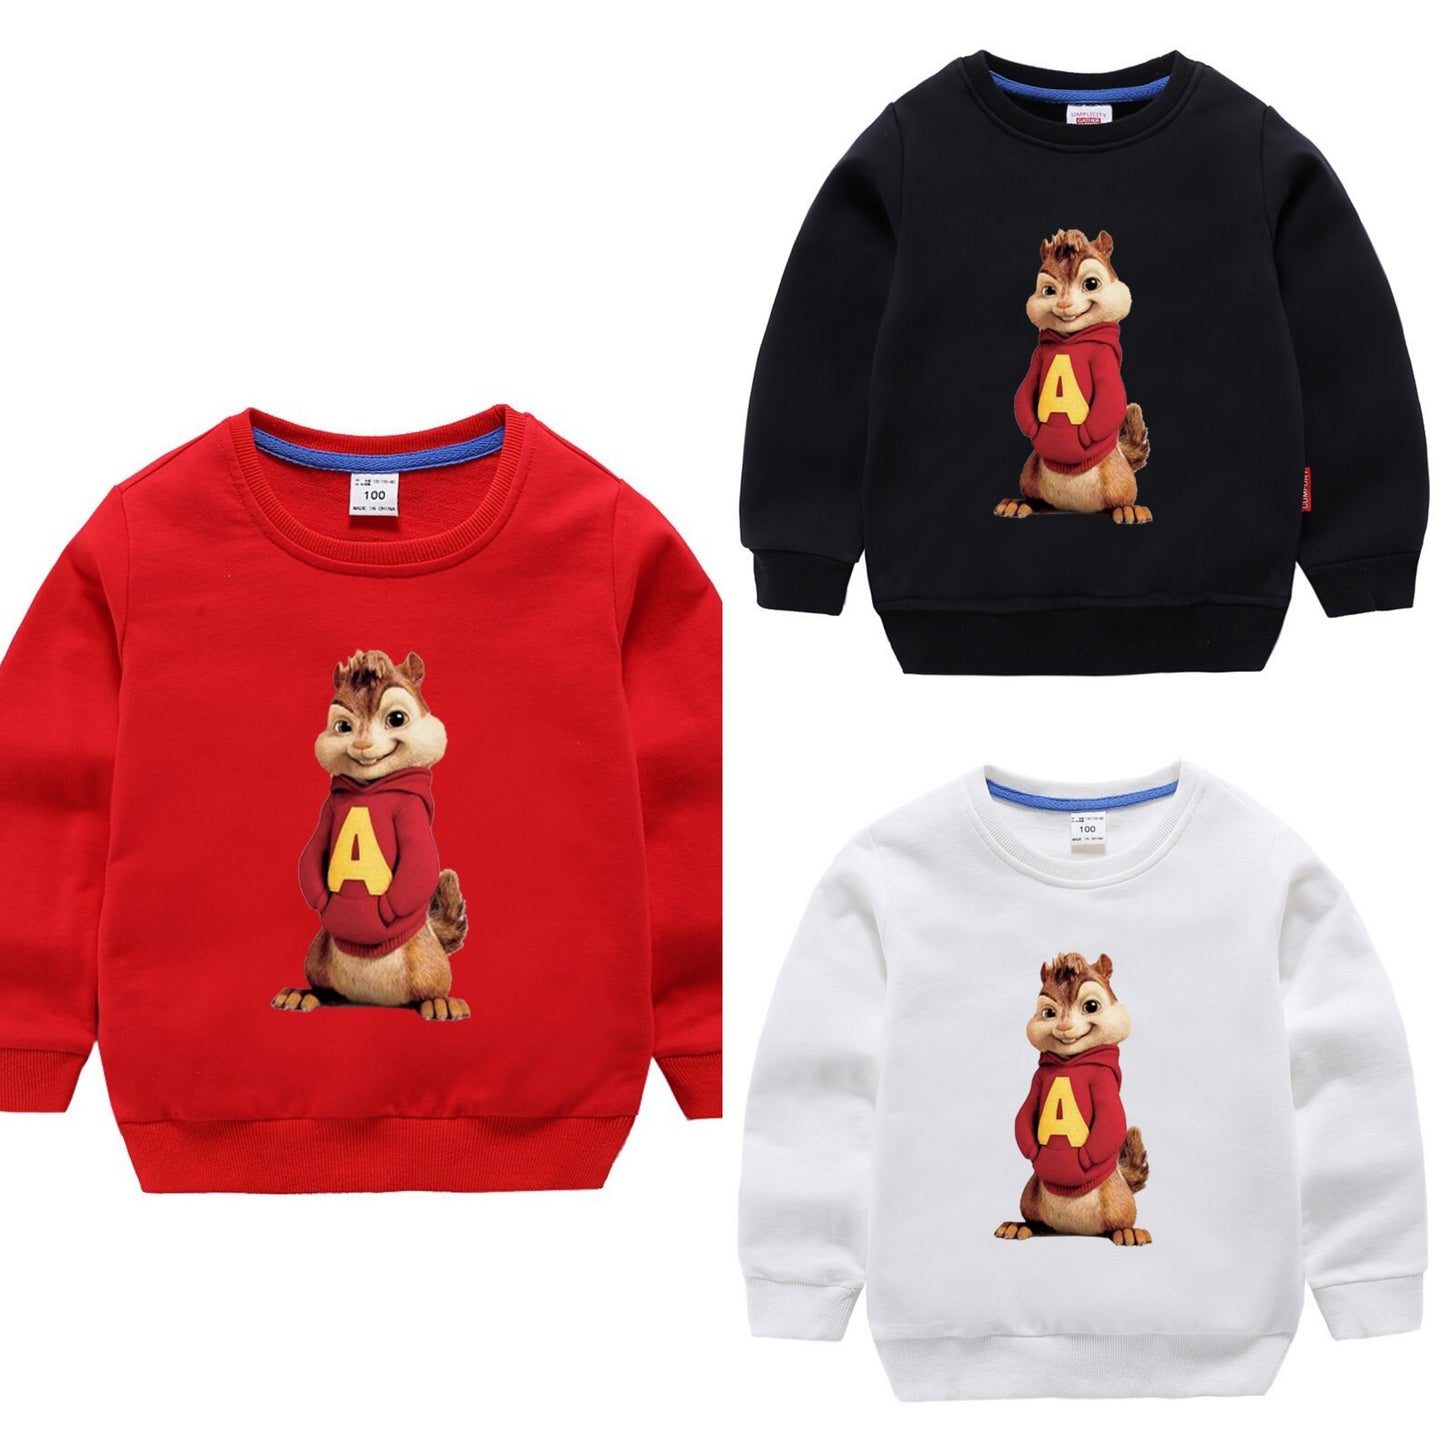 PACK OF 3 PRINTED KIDS SWEAT SHIRTS FOR BOYS (Print 104)